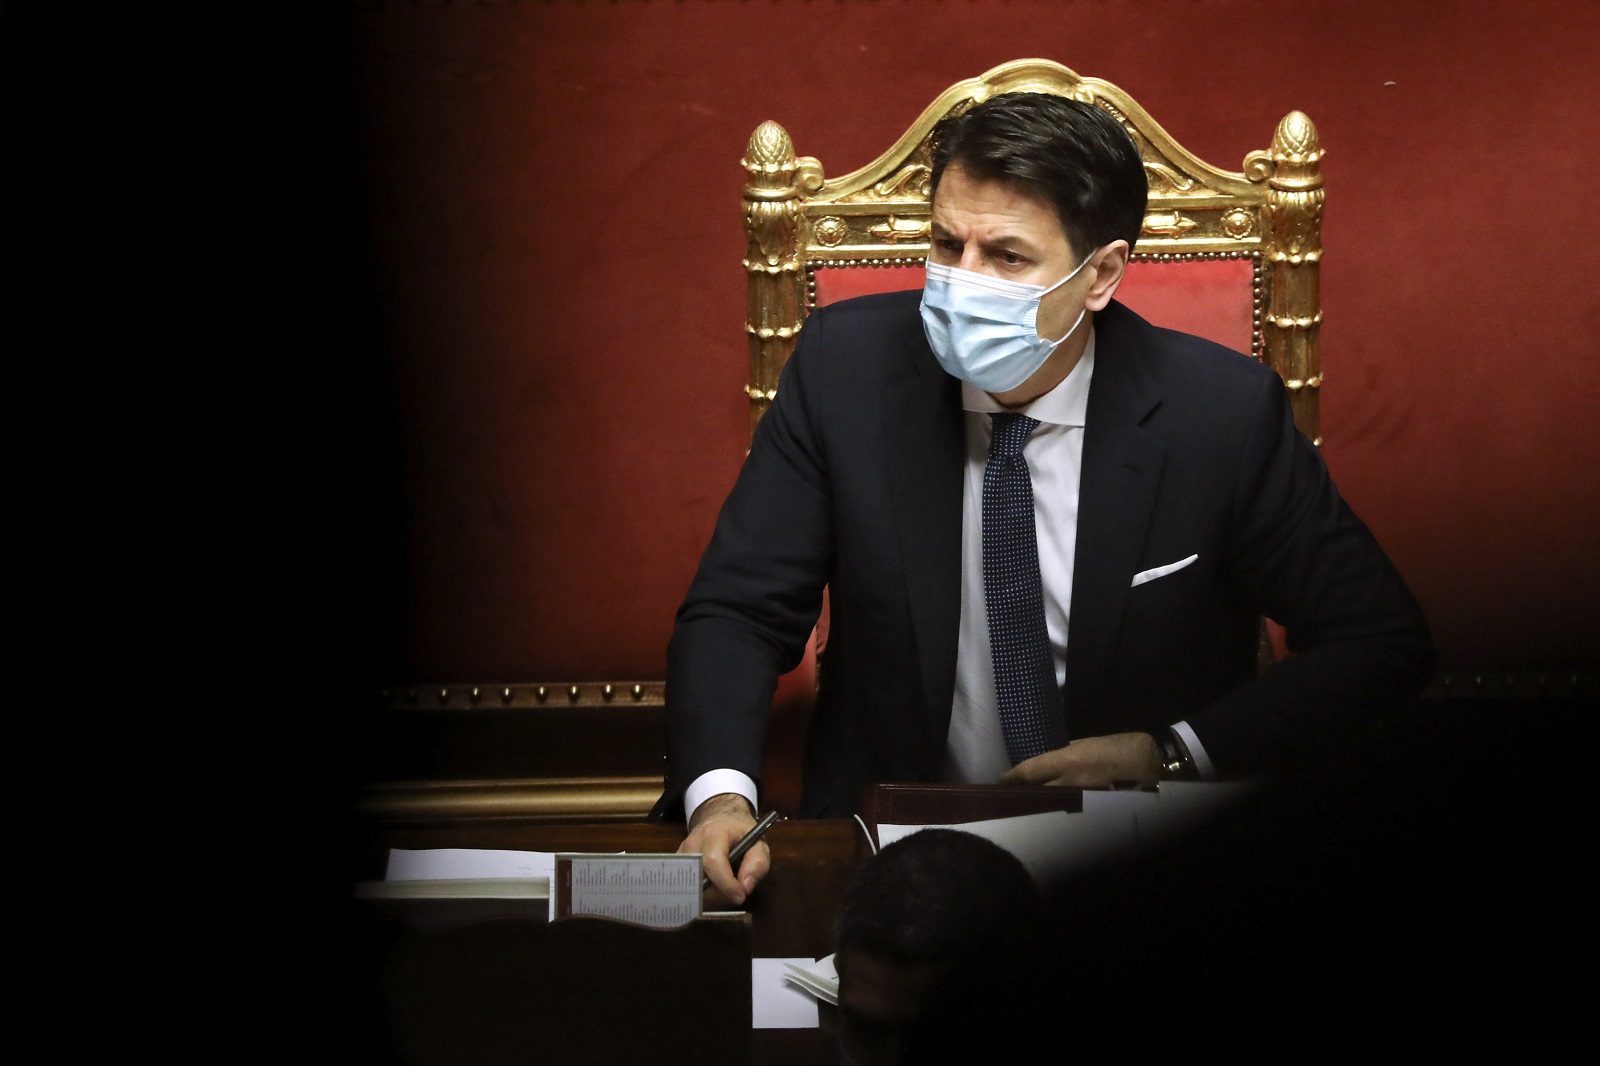 epa08949115 Giuseppe Conte, Italy's prime minister, listens during a debate in the Senate in Rome, Italy, 19 January 2021. Following the resignation of two ministers in Italian Prime Minister Conte's coalition government over a dispute on spending of EU funds during the pandemic, the Italian government is on the verge of another crisis.  EPA/Alessia Pierdomenico / POOL